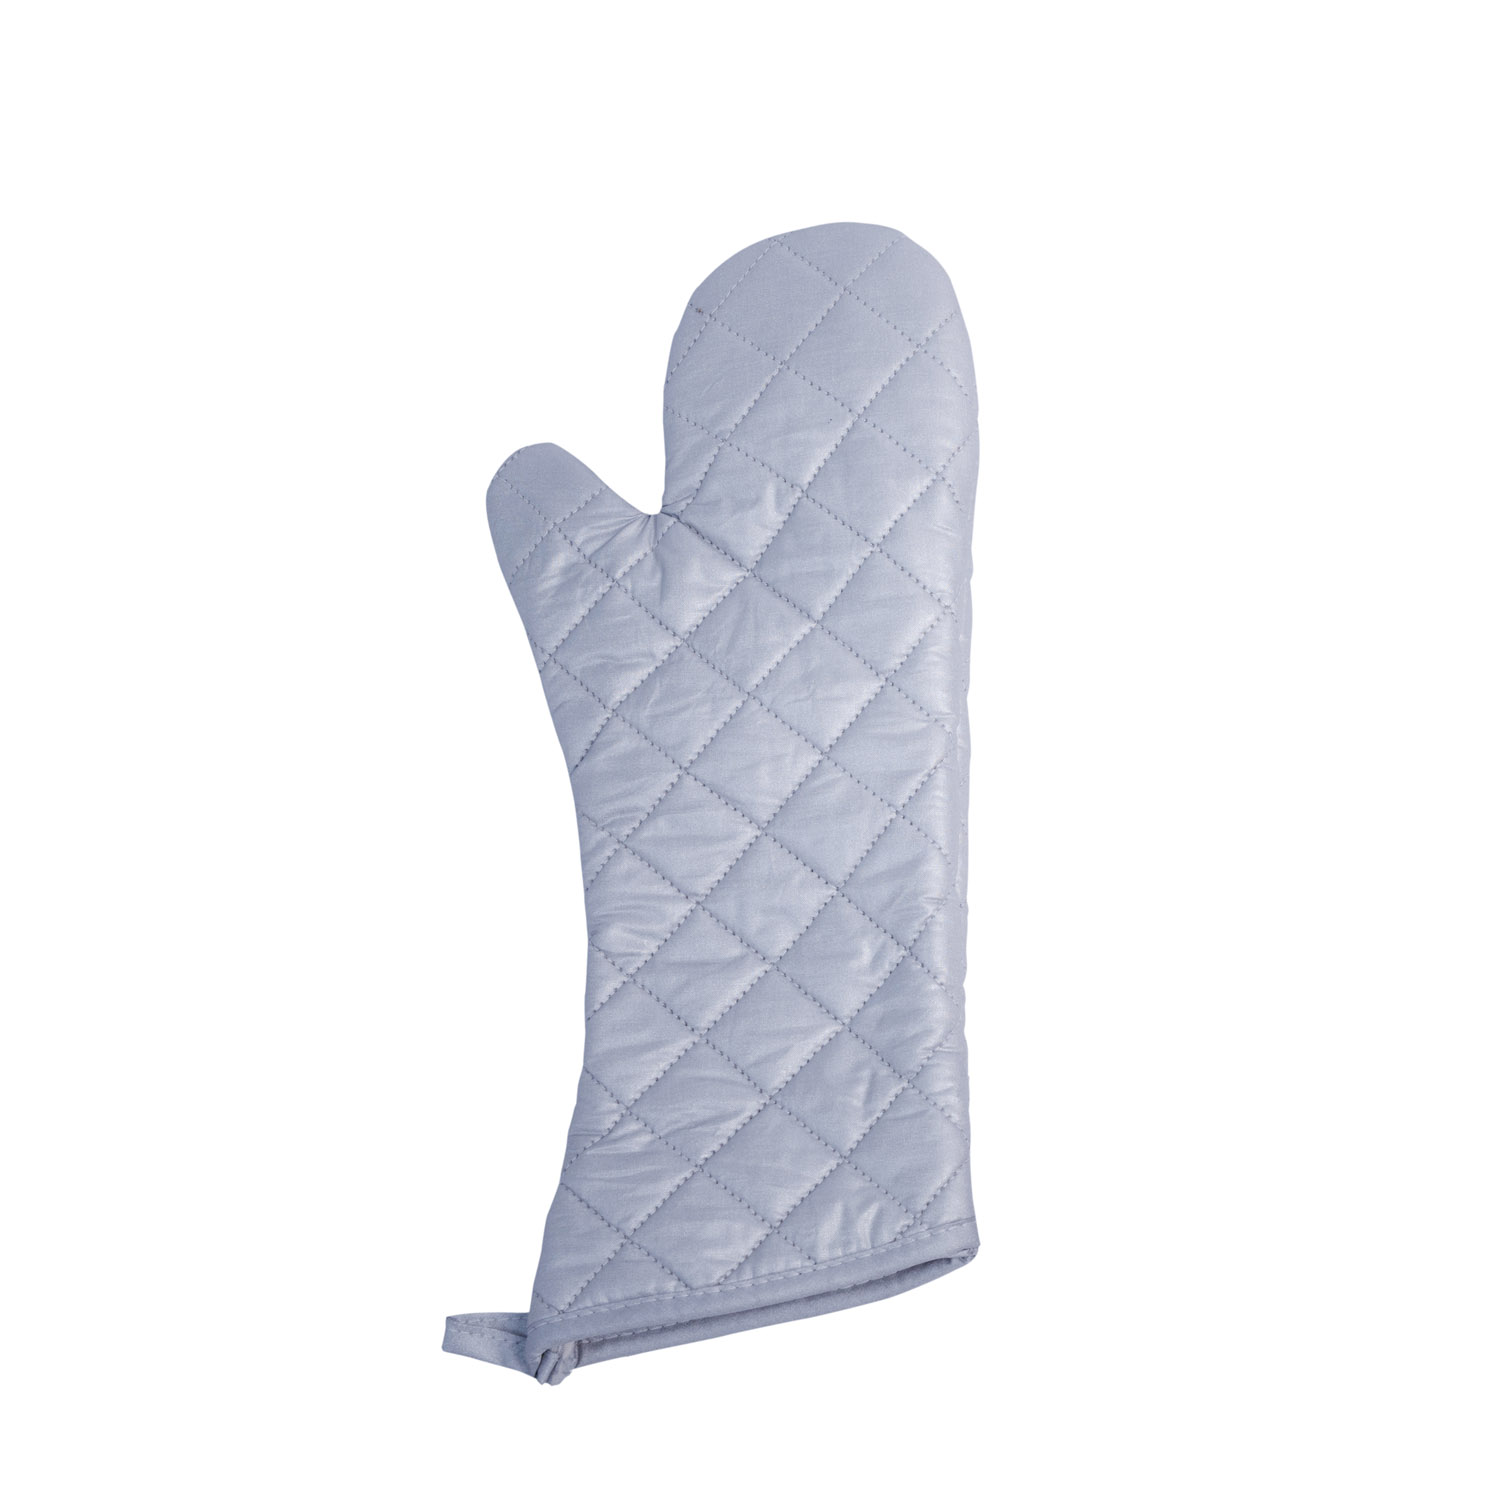 CAC China OMS1-17 Silicone-Coated Cotton Oven Mitt 17"